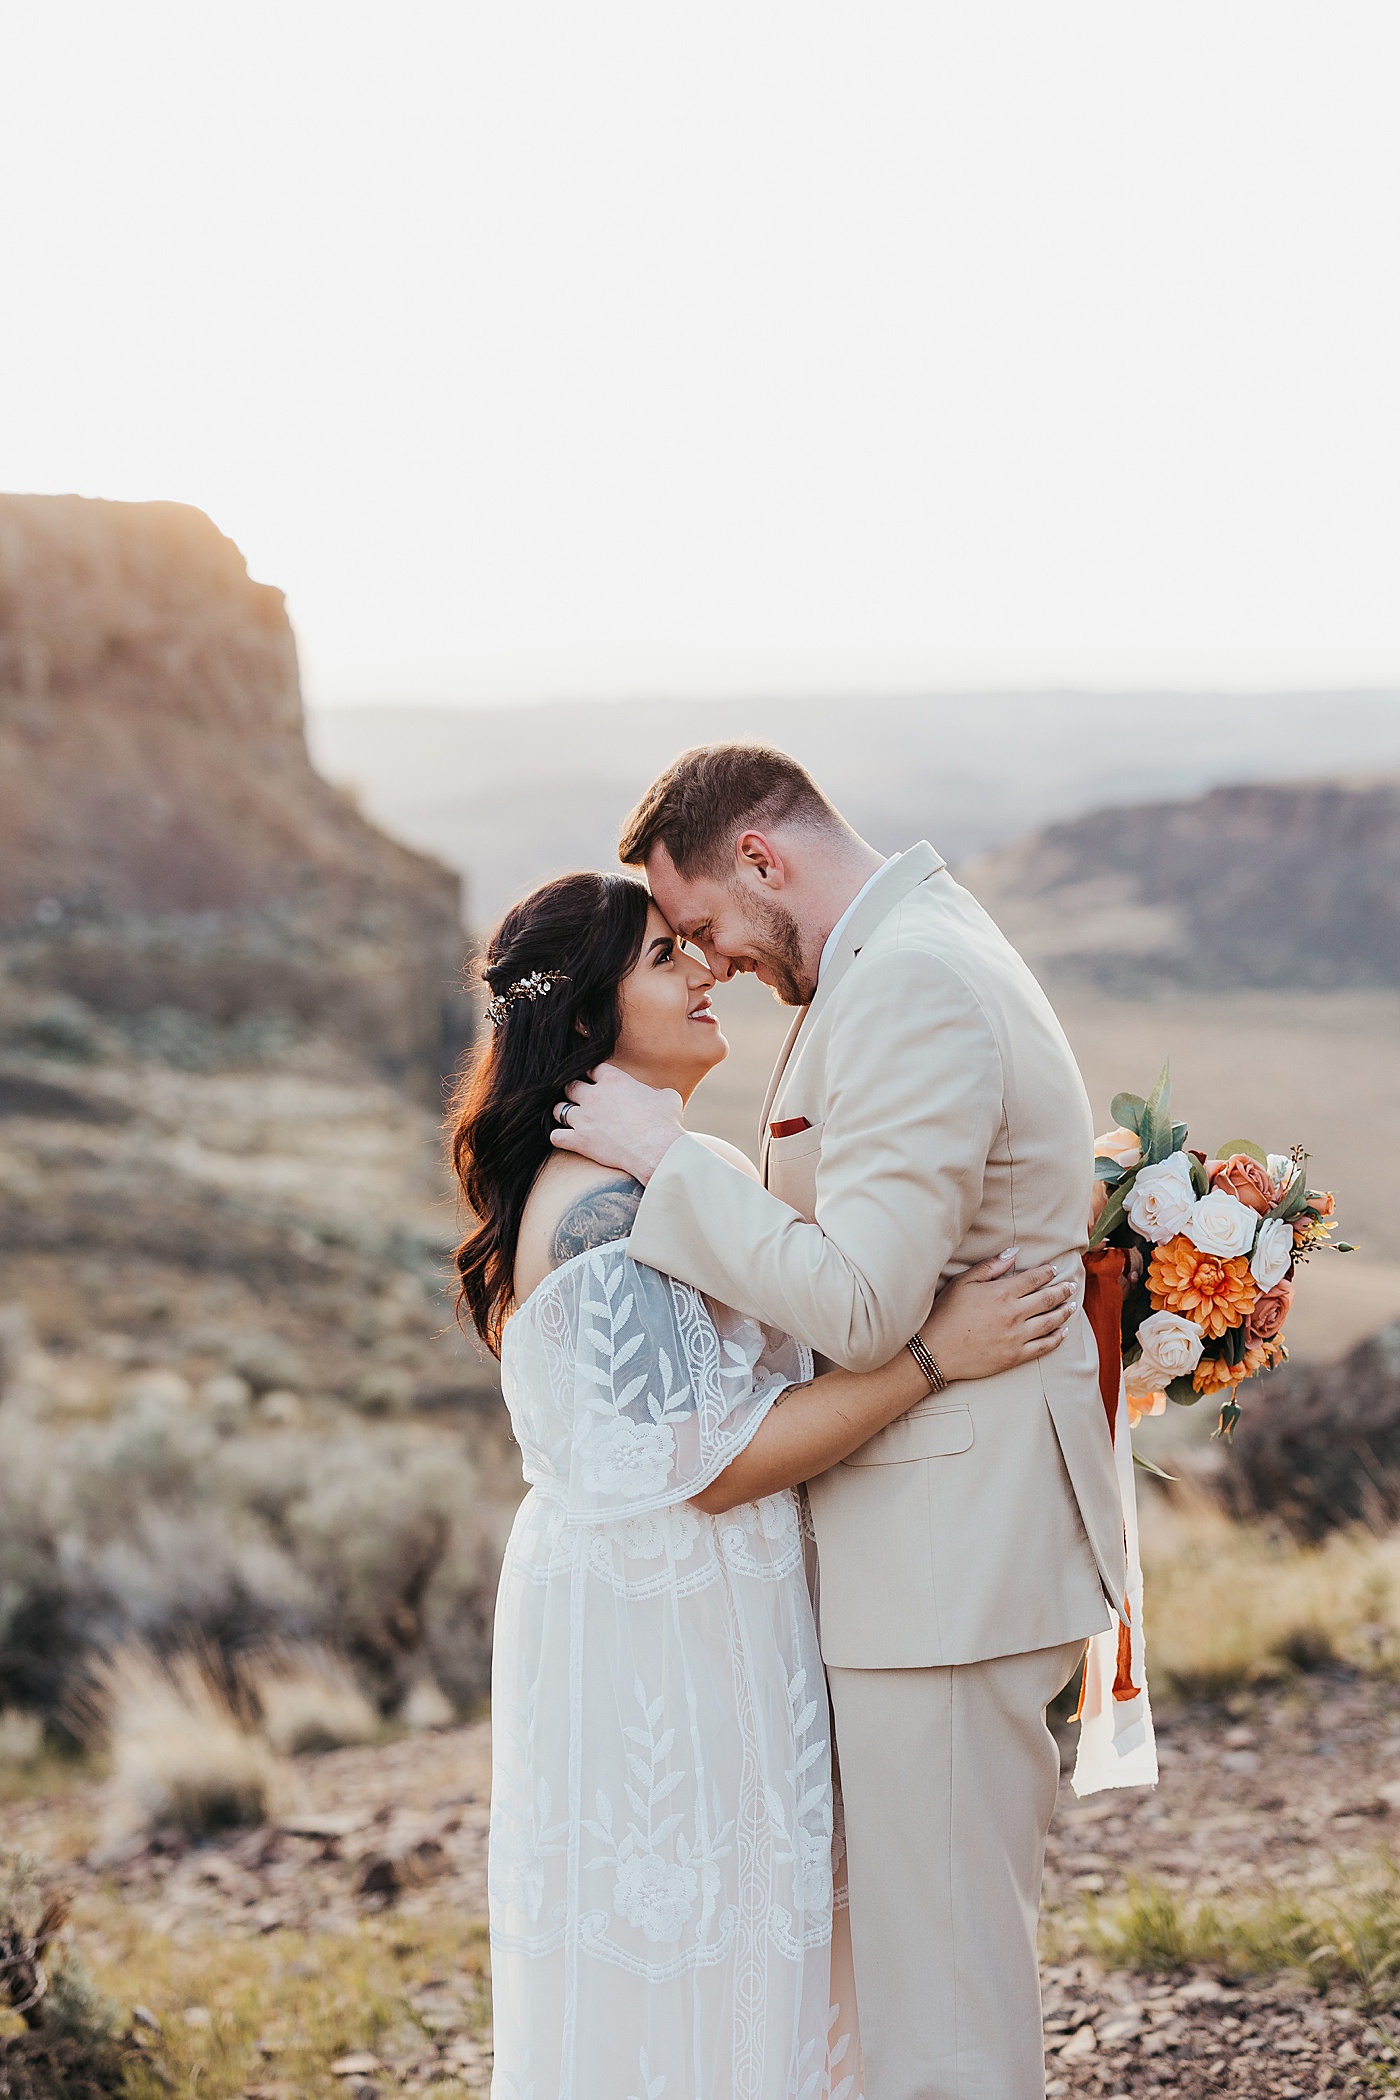 Bride and groom portraits at Vantage in Central Washington | Photo by Megan Montalvo Photography